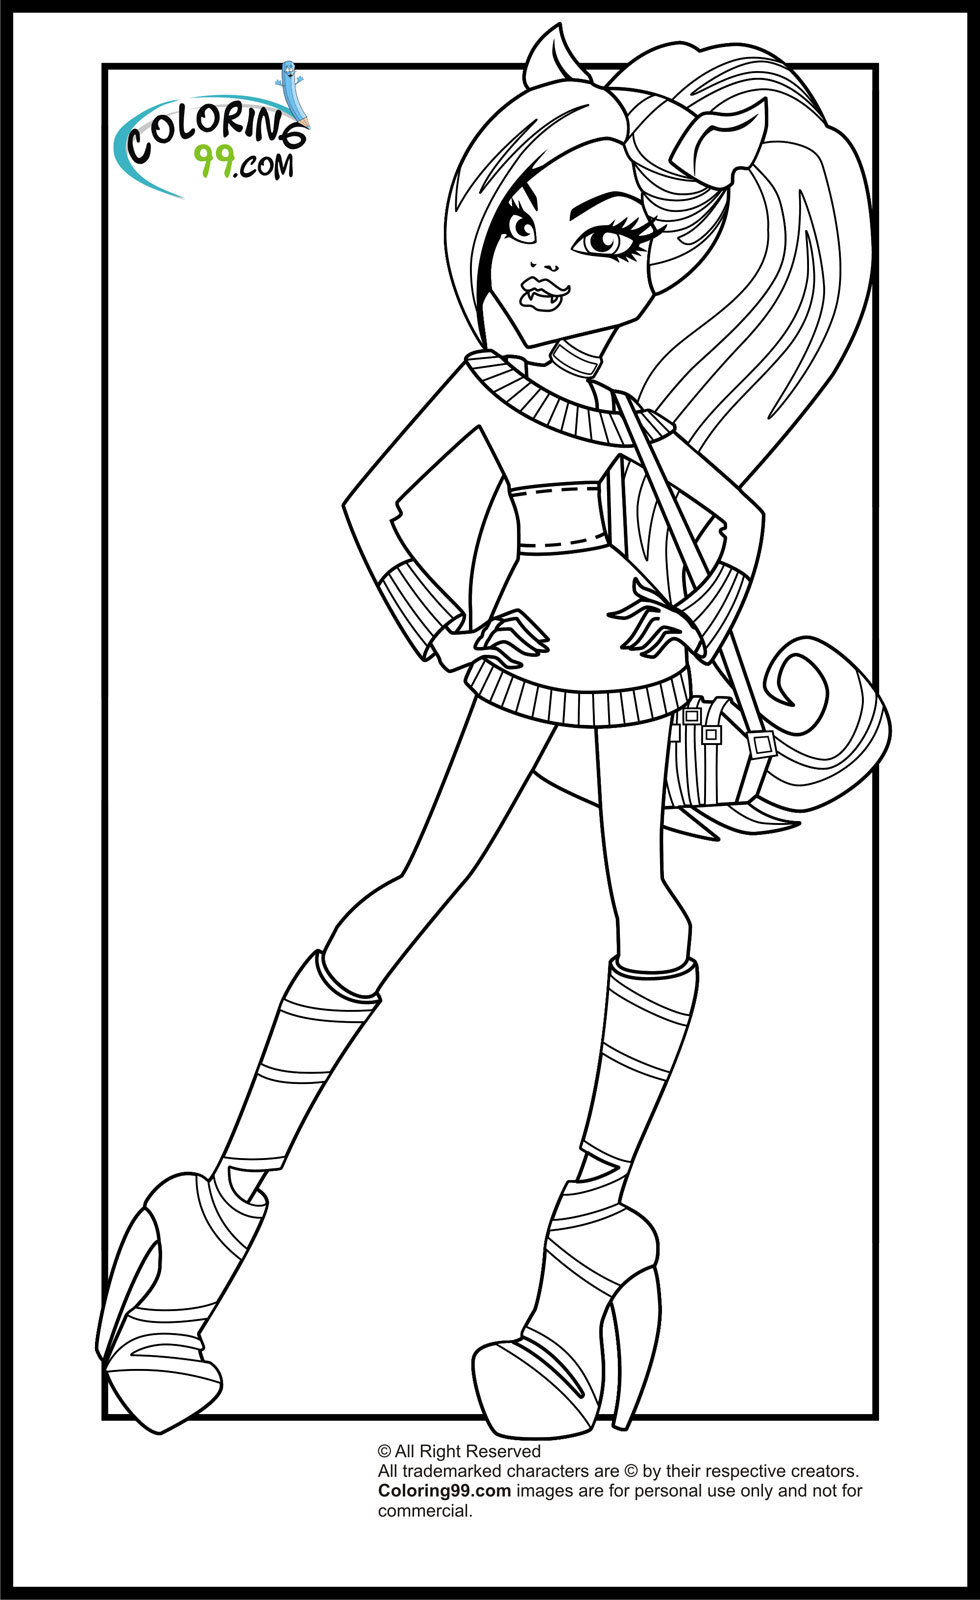 color pages monster high coloring pages monster high coloring pages free and printable pages monster high color 